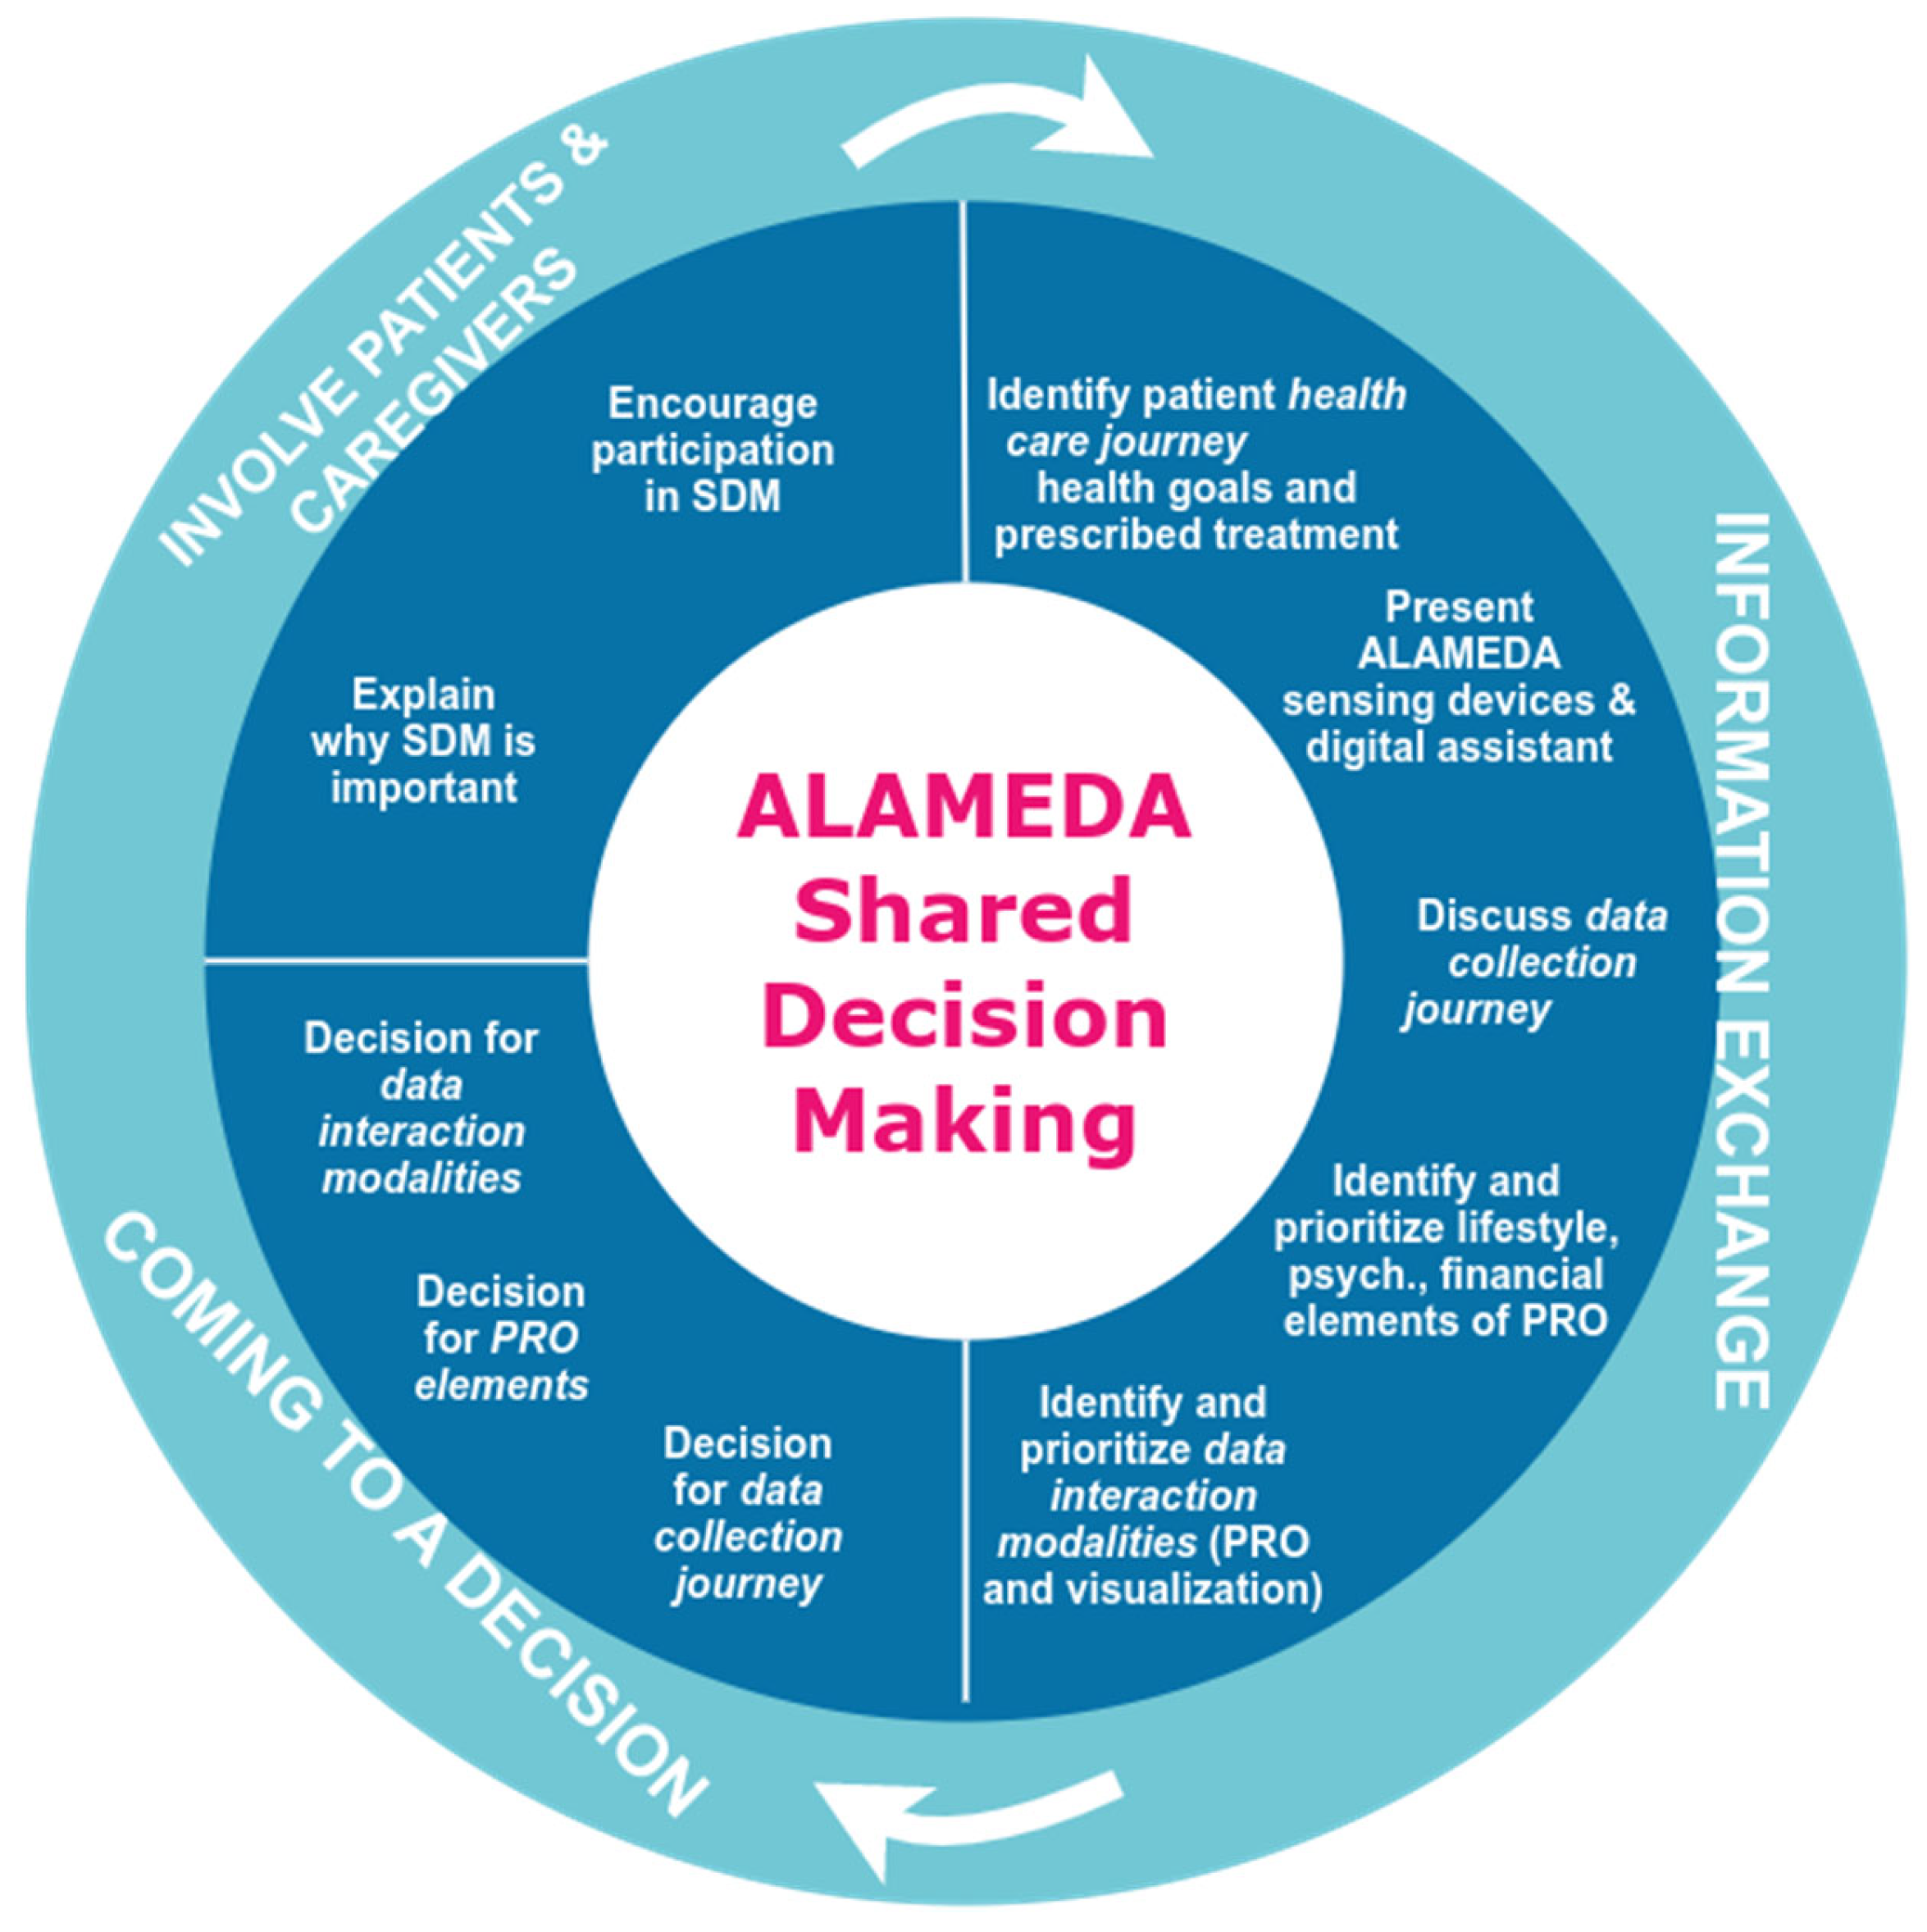 Engaging Patients Through Shared Decision-Making - AZ Care Network